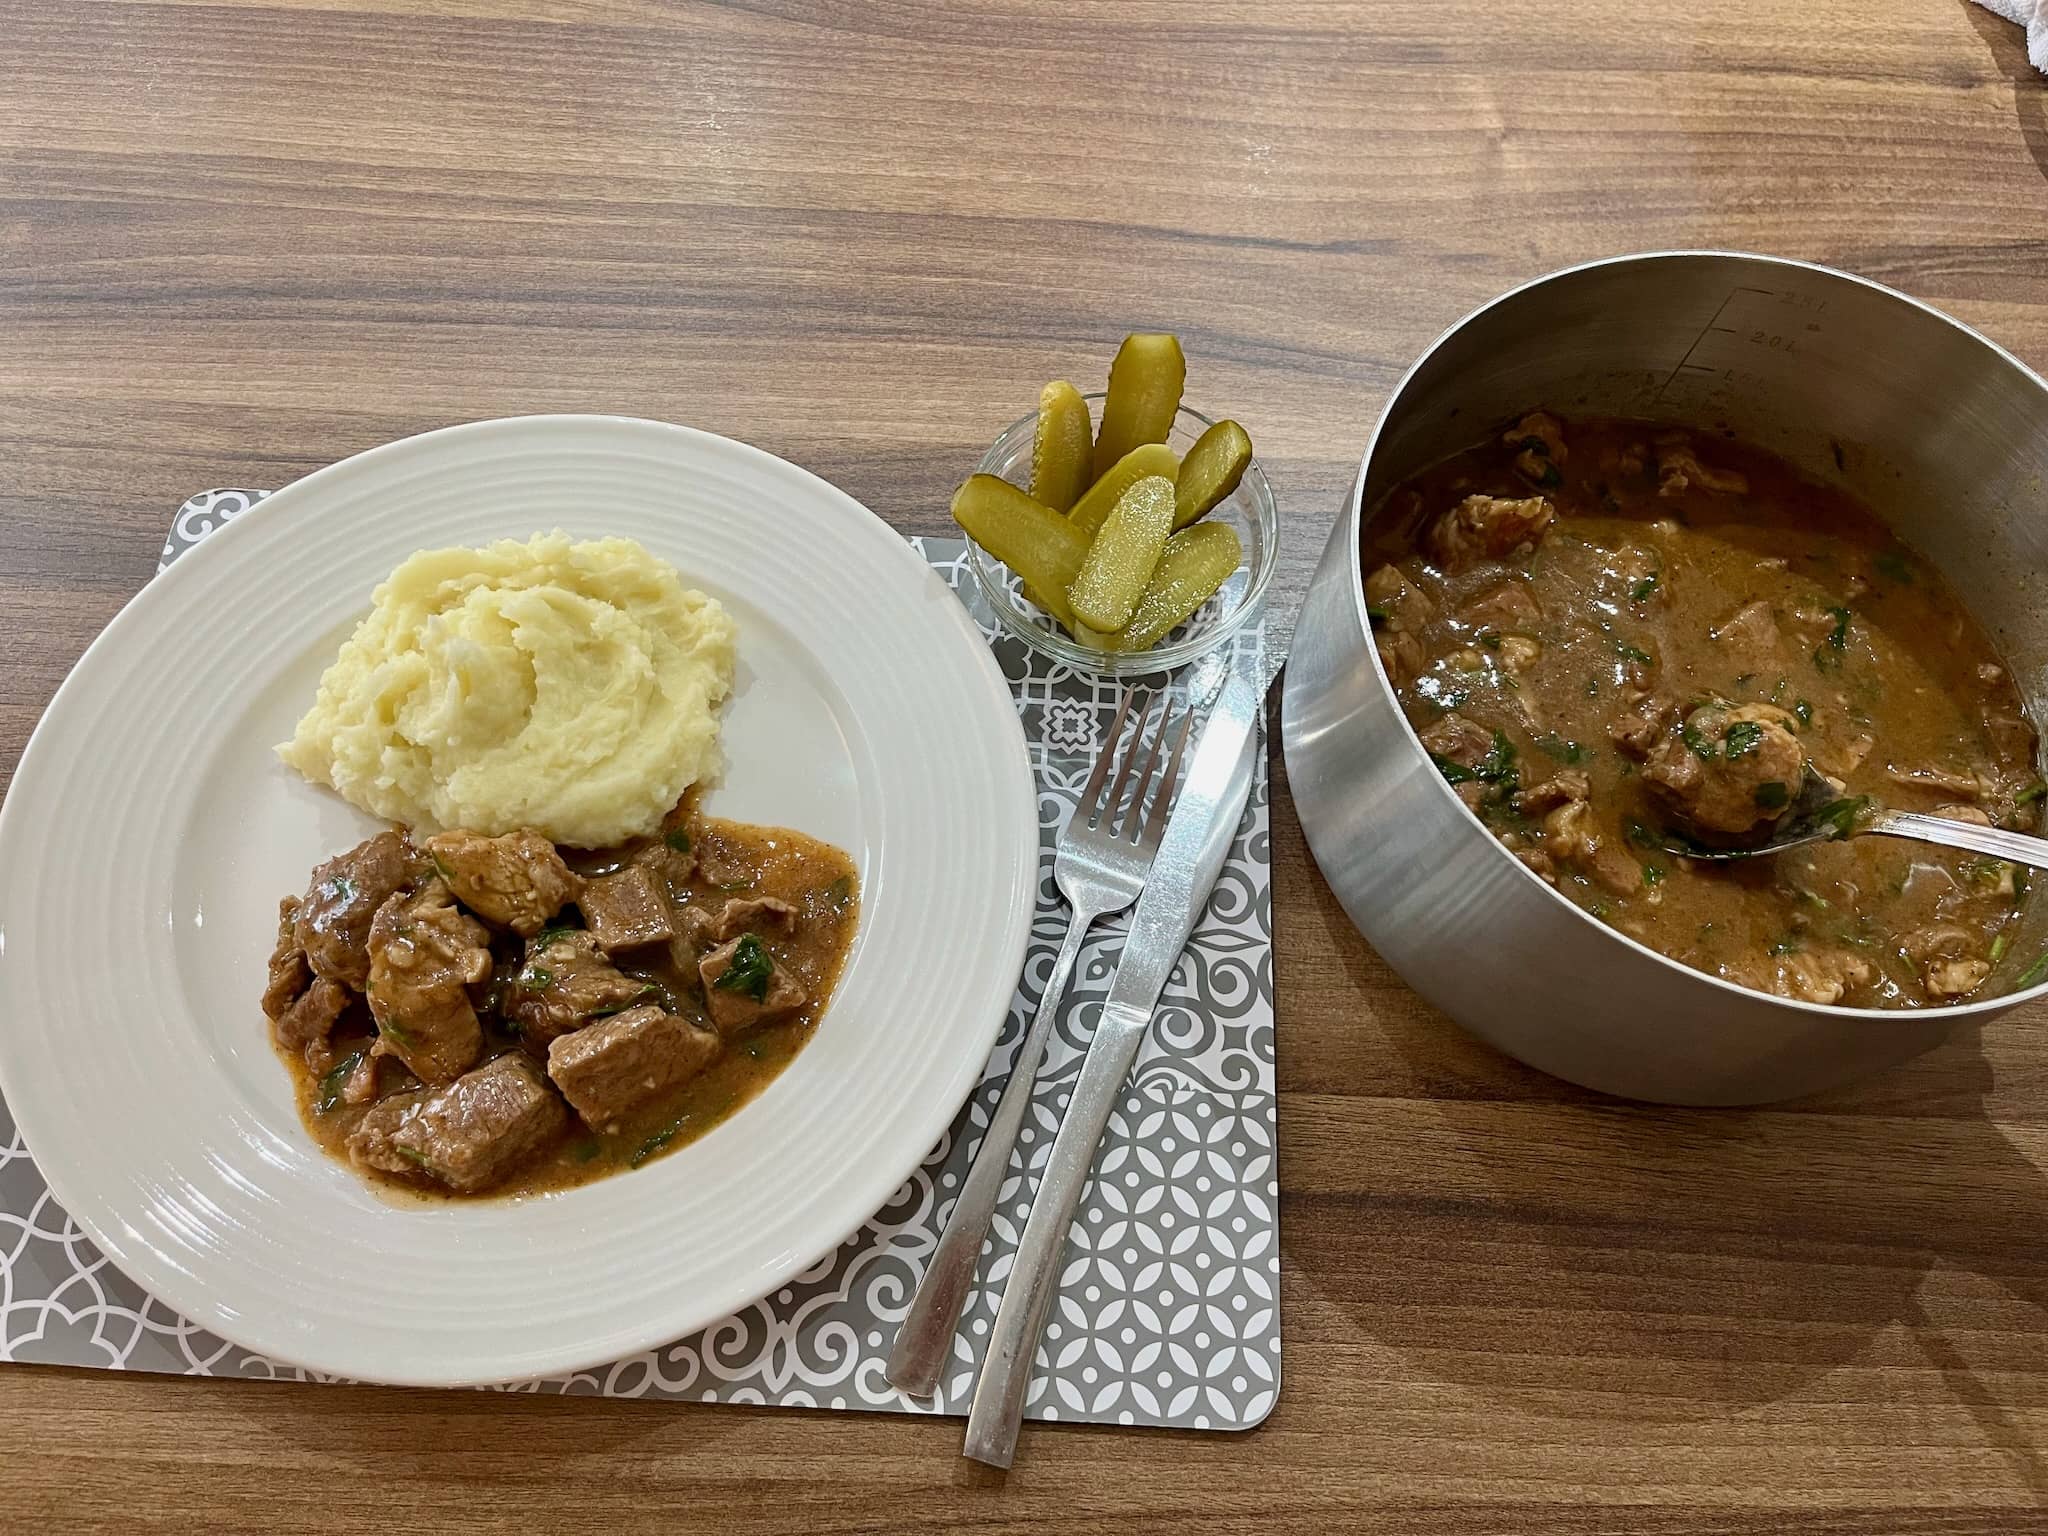 Pork goulash served with mashed potatoes and gherkins on the side